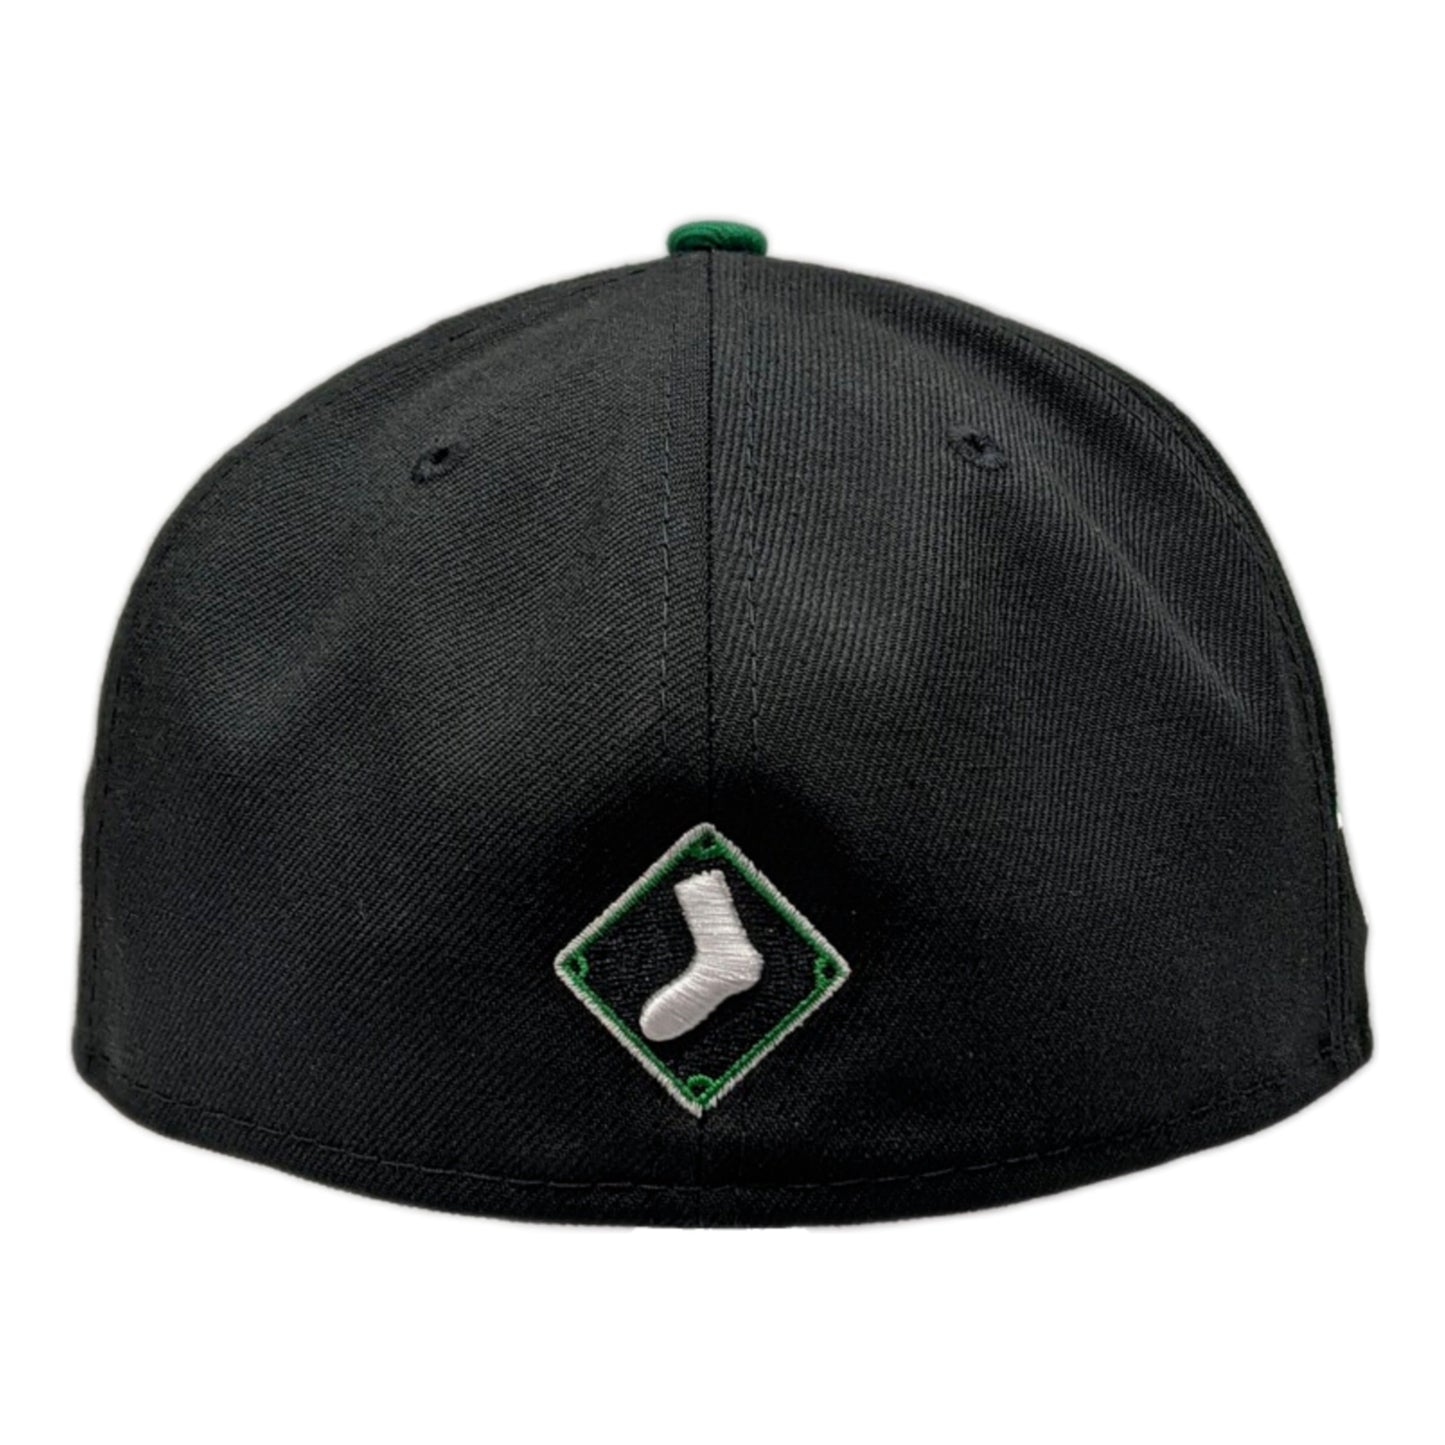 Chicago White Sox New Era 2 Tone Prime Diamond Black/Green 59FIFTY Fitted Hat